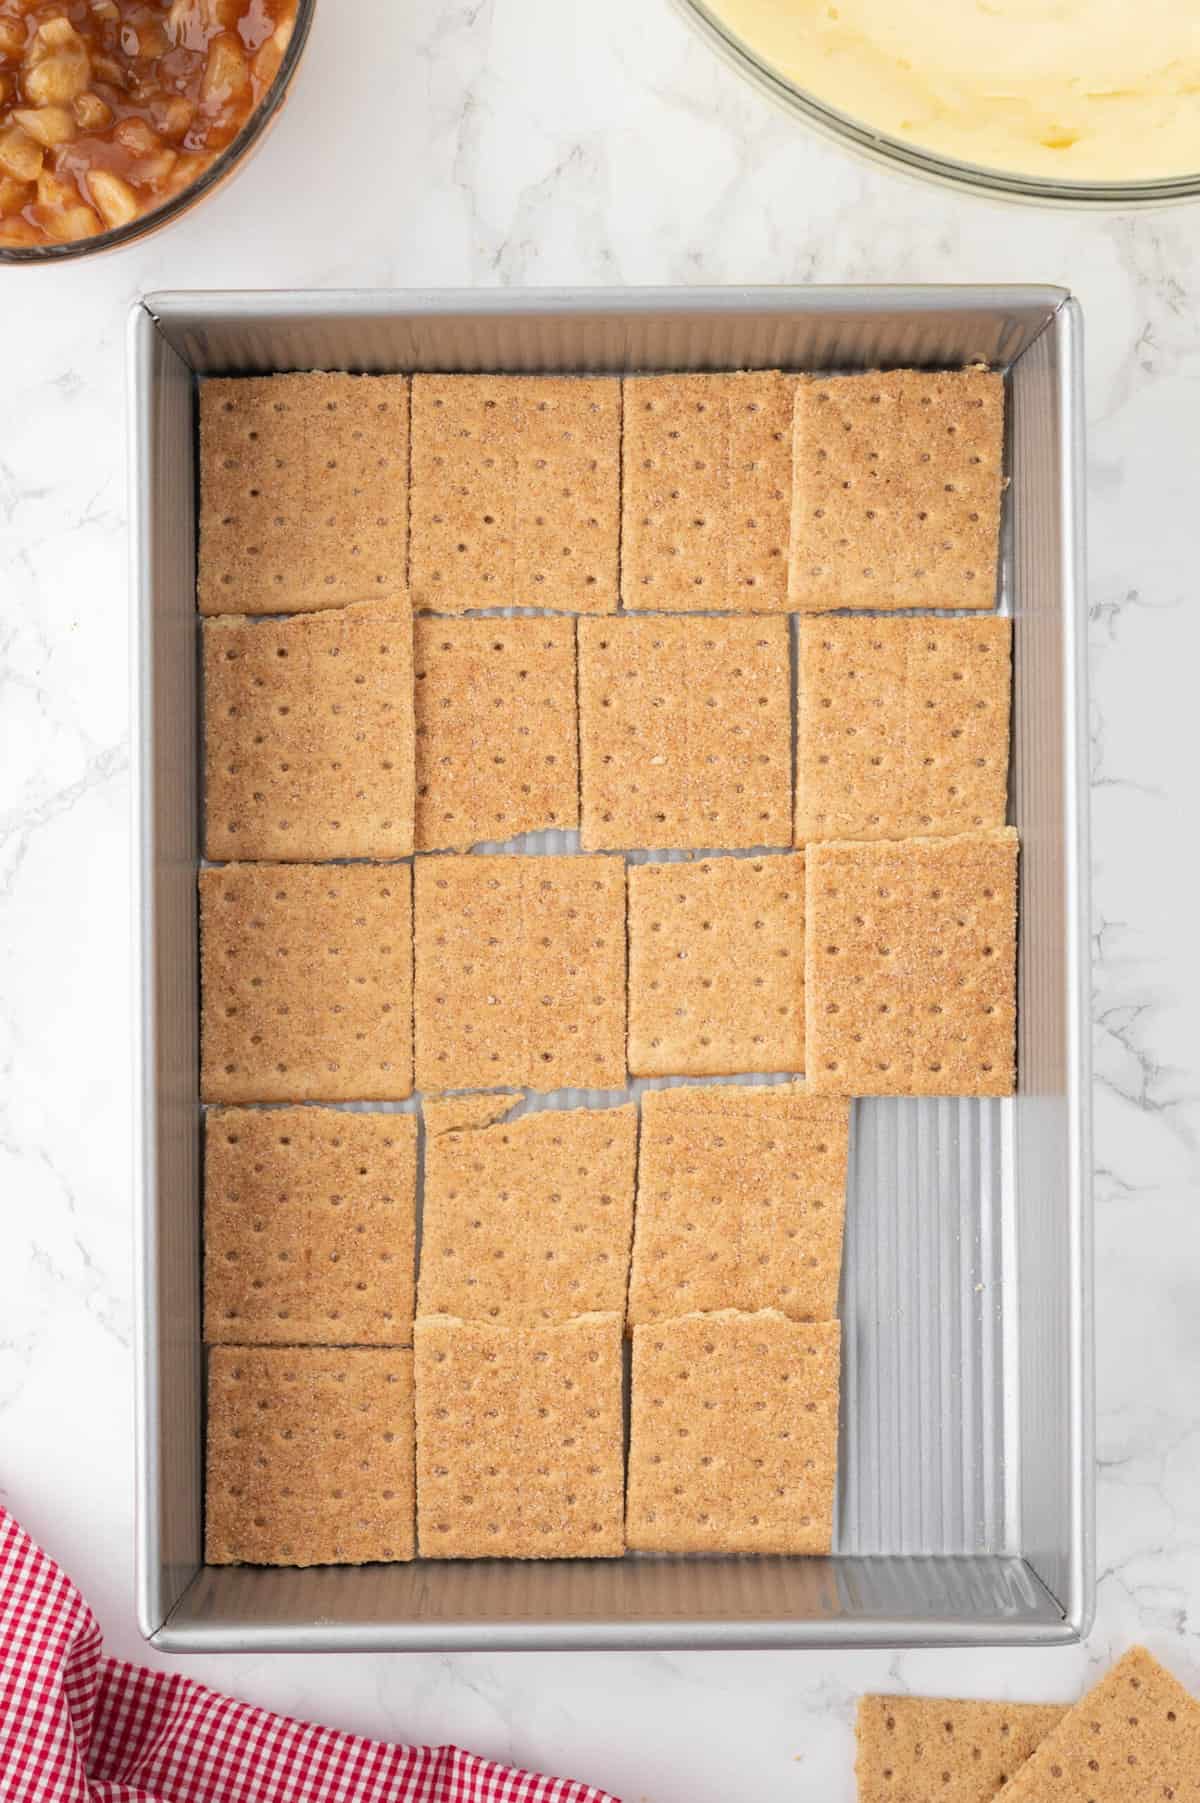 Cinnamon graham cracker squares arranged in a single layer on the bottom of a 9x13-inch baking pan.